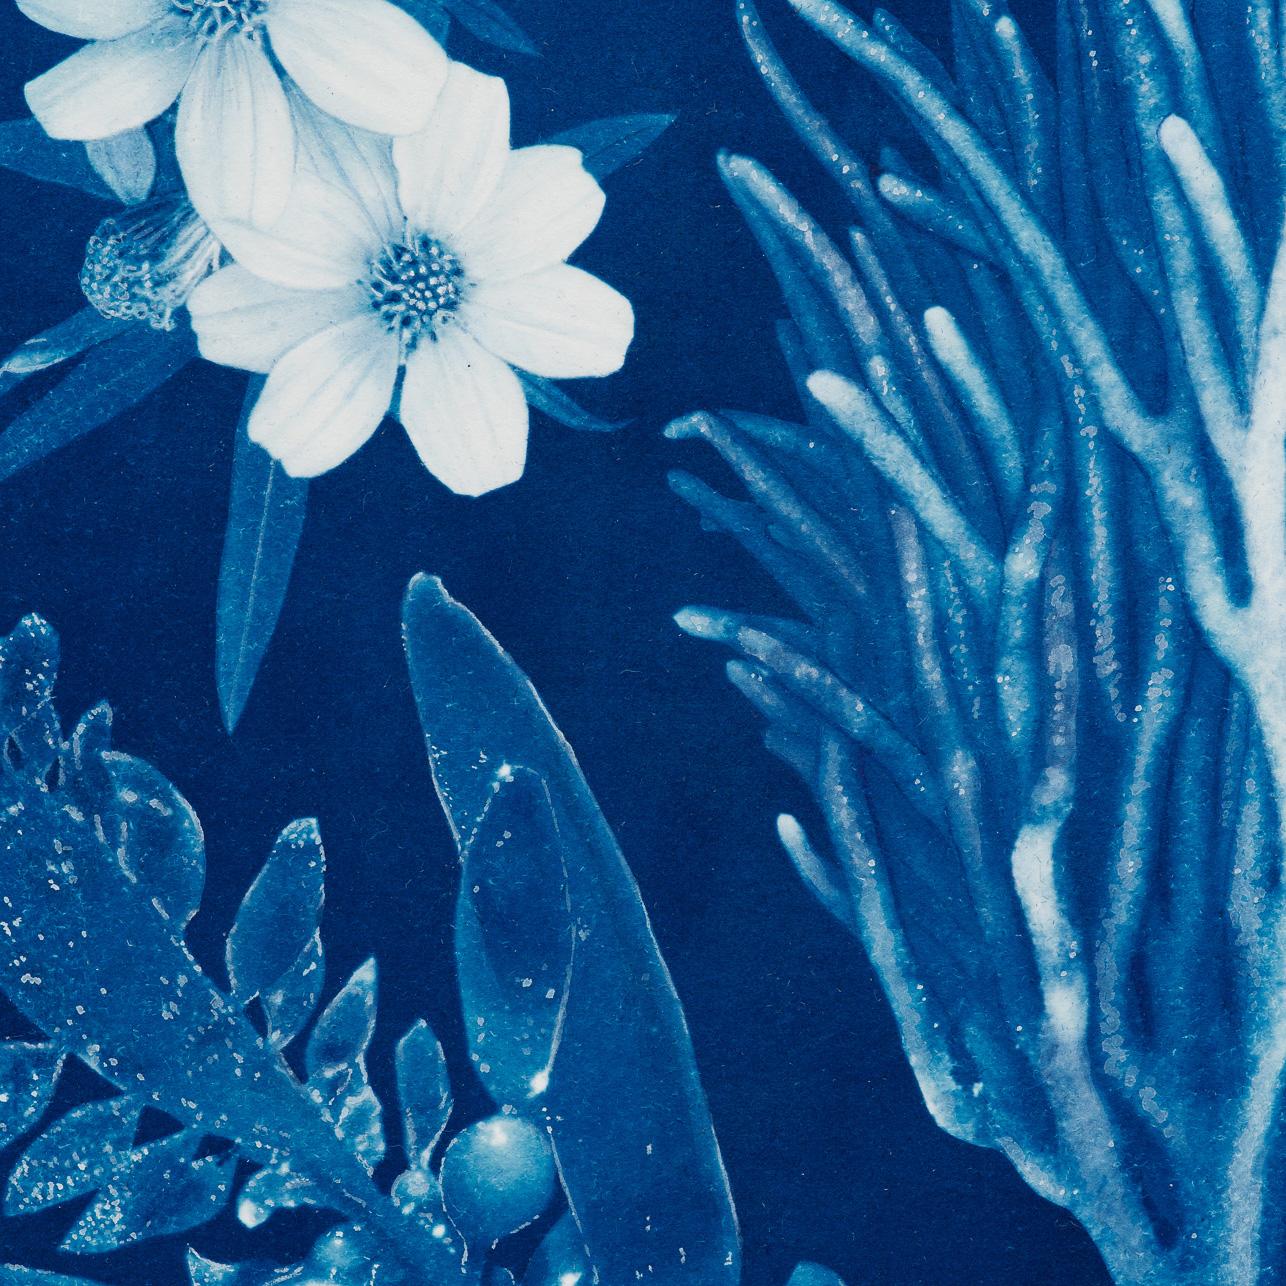 A Surreal Watercolor and Cyanotype, 